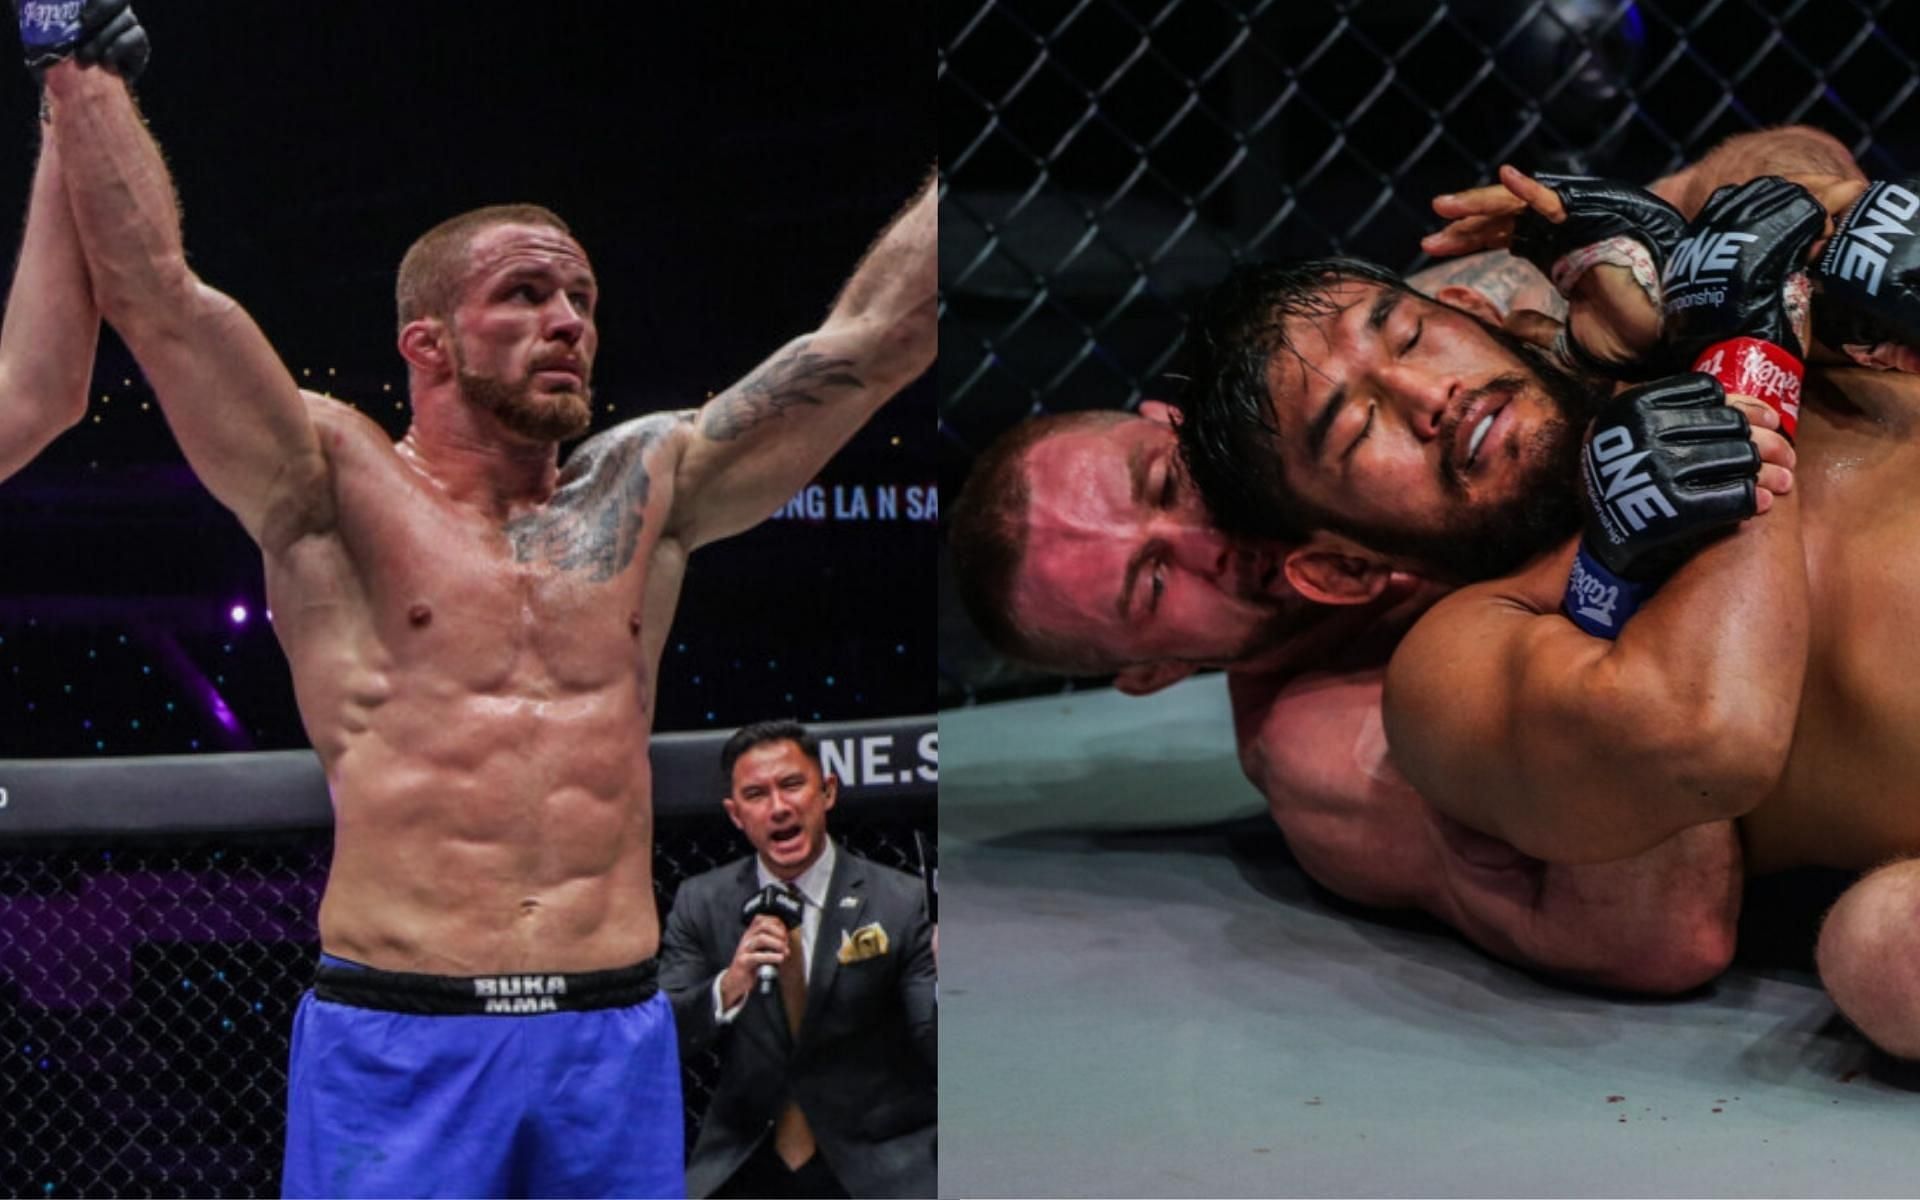 Former ONE middleweight champion Vitaly Bigdash (right) beat his rival Aung La N Sang in a rubber match back in February of this year. (Images courtesy of ONE Championship)